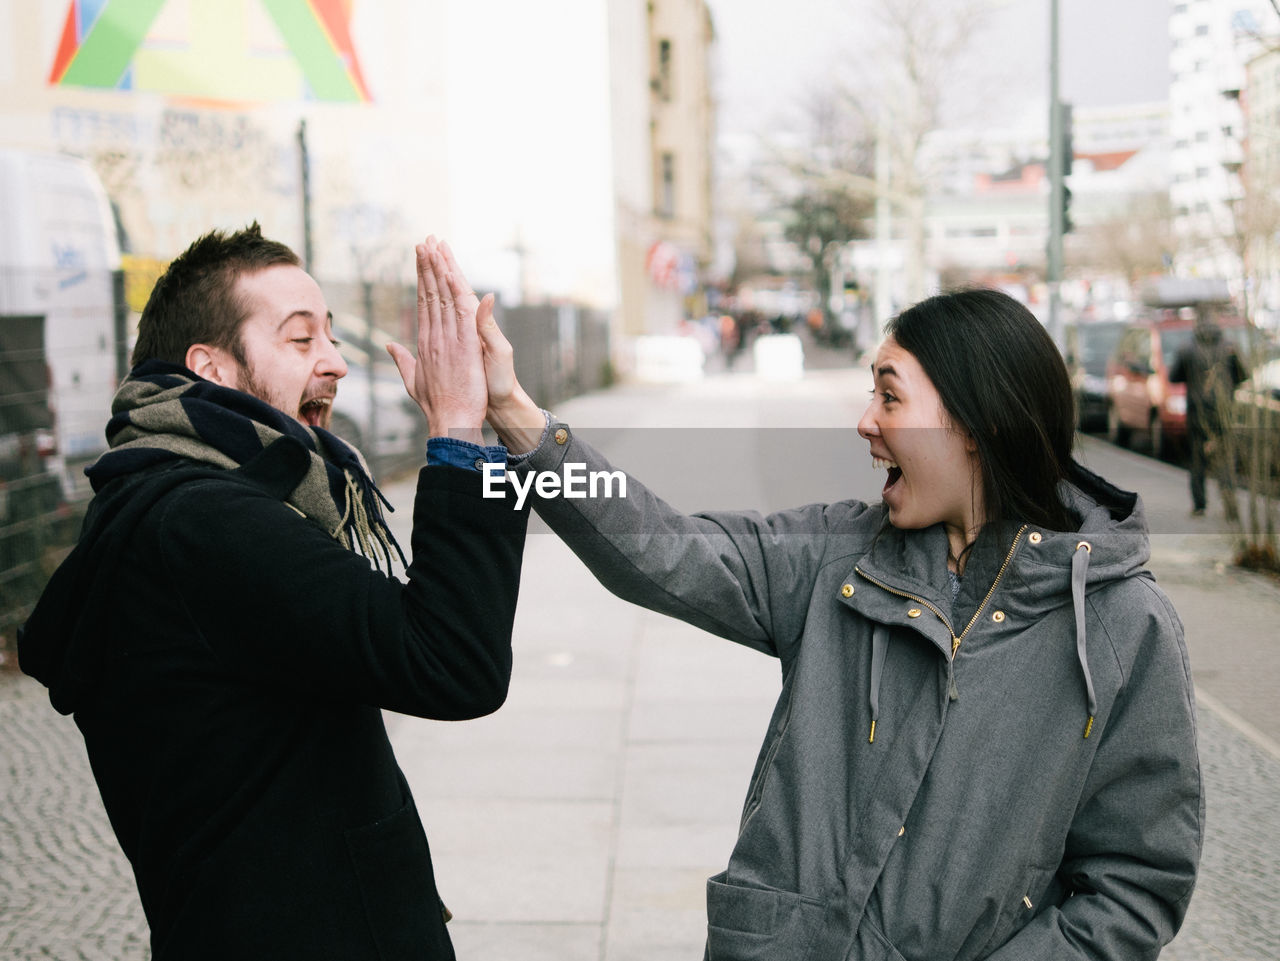 Excited friends giving high-five on sidewalk in city